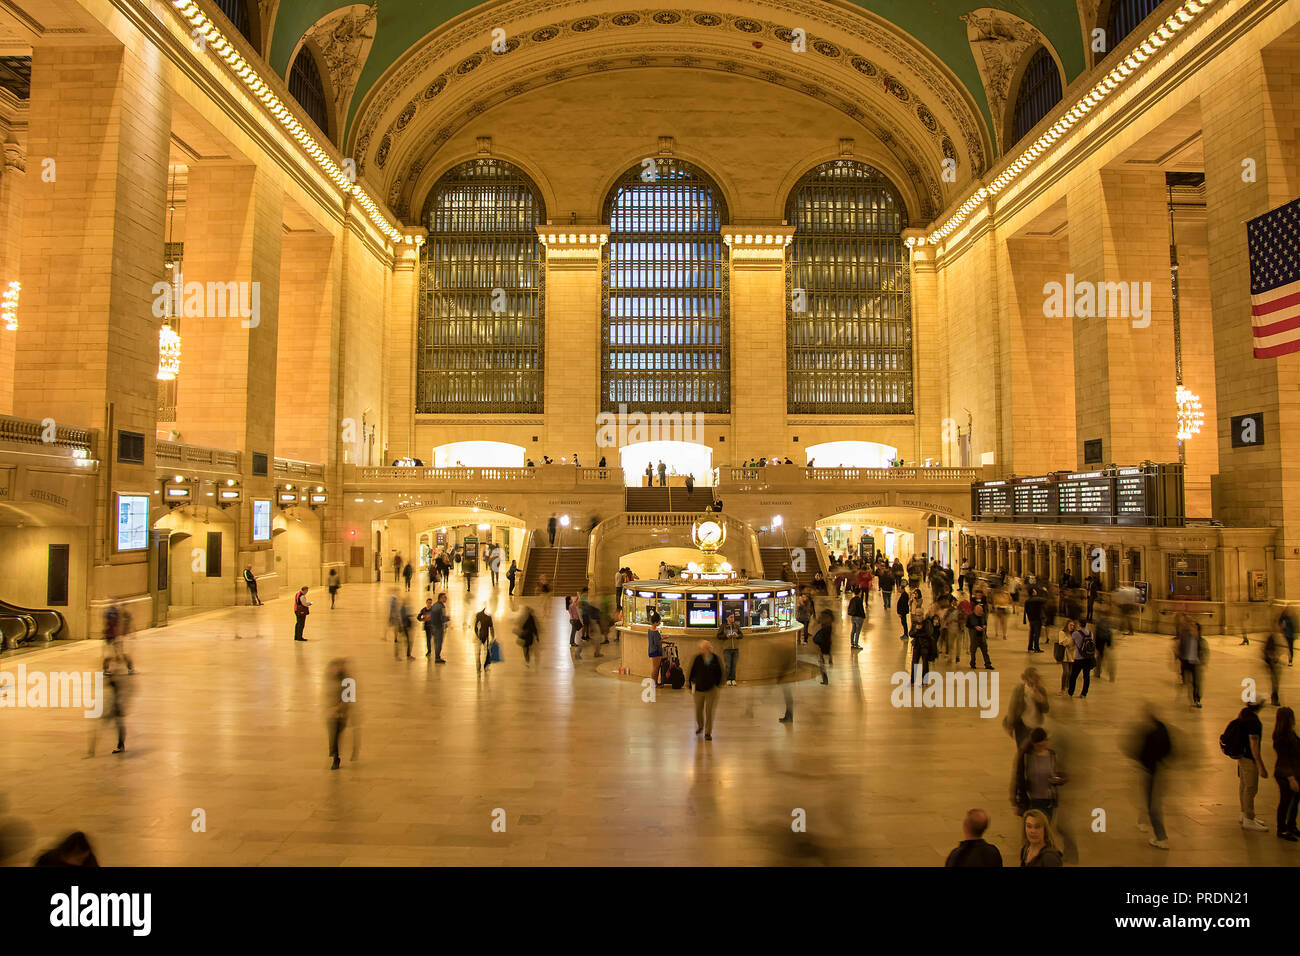 New York City, USA - June 12, 2017: Grand Central Station activity Stock Photo